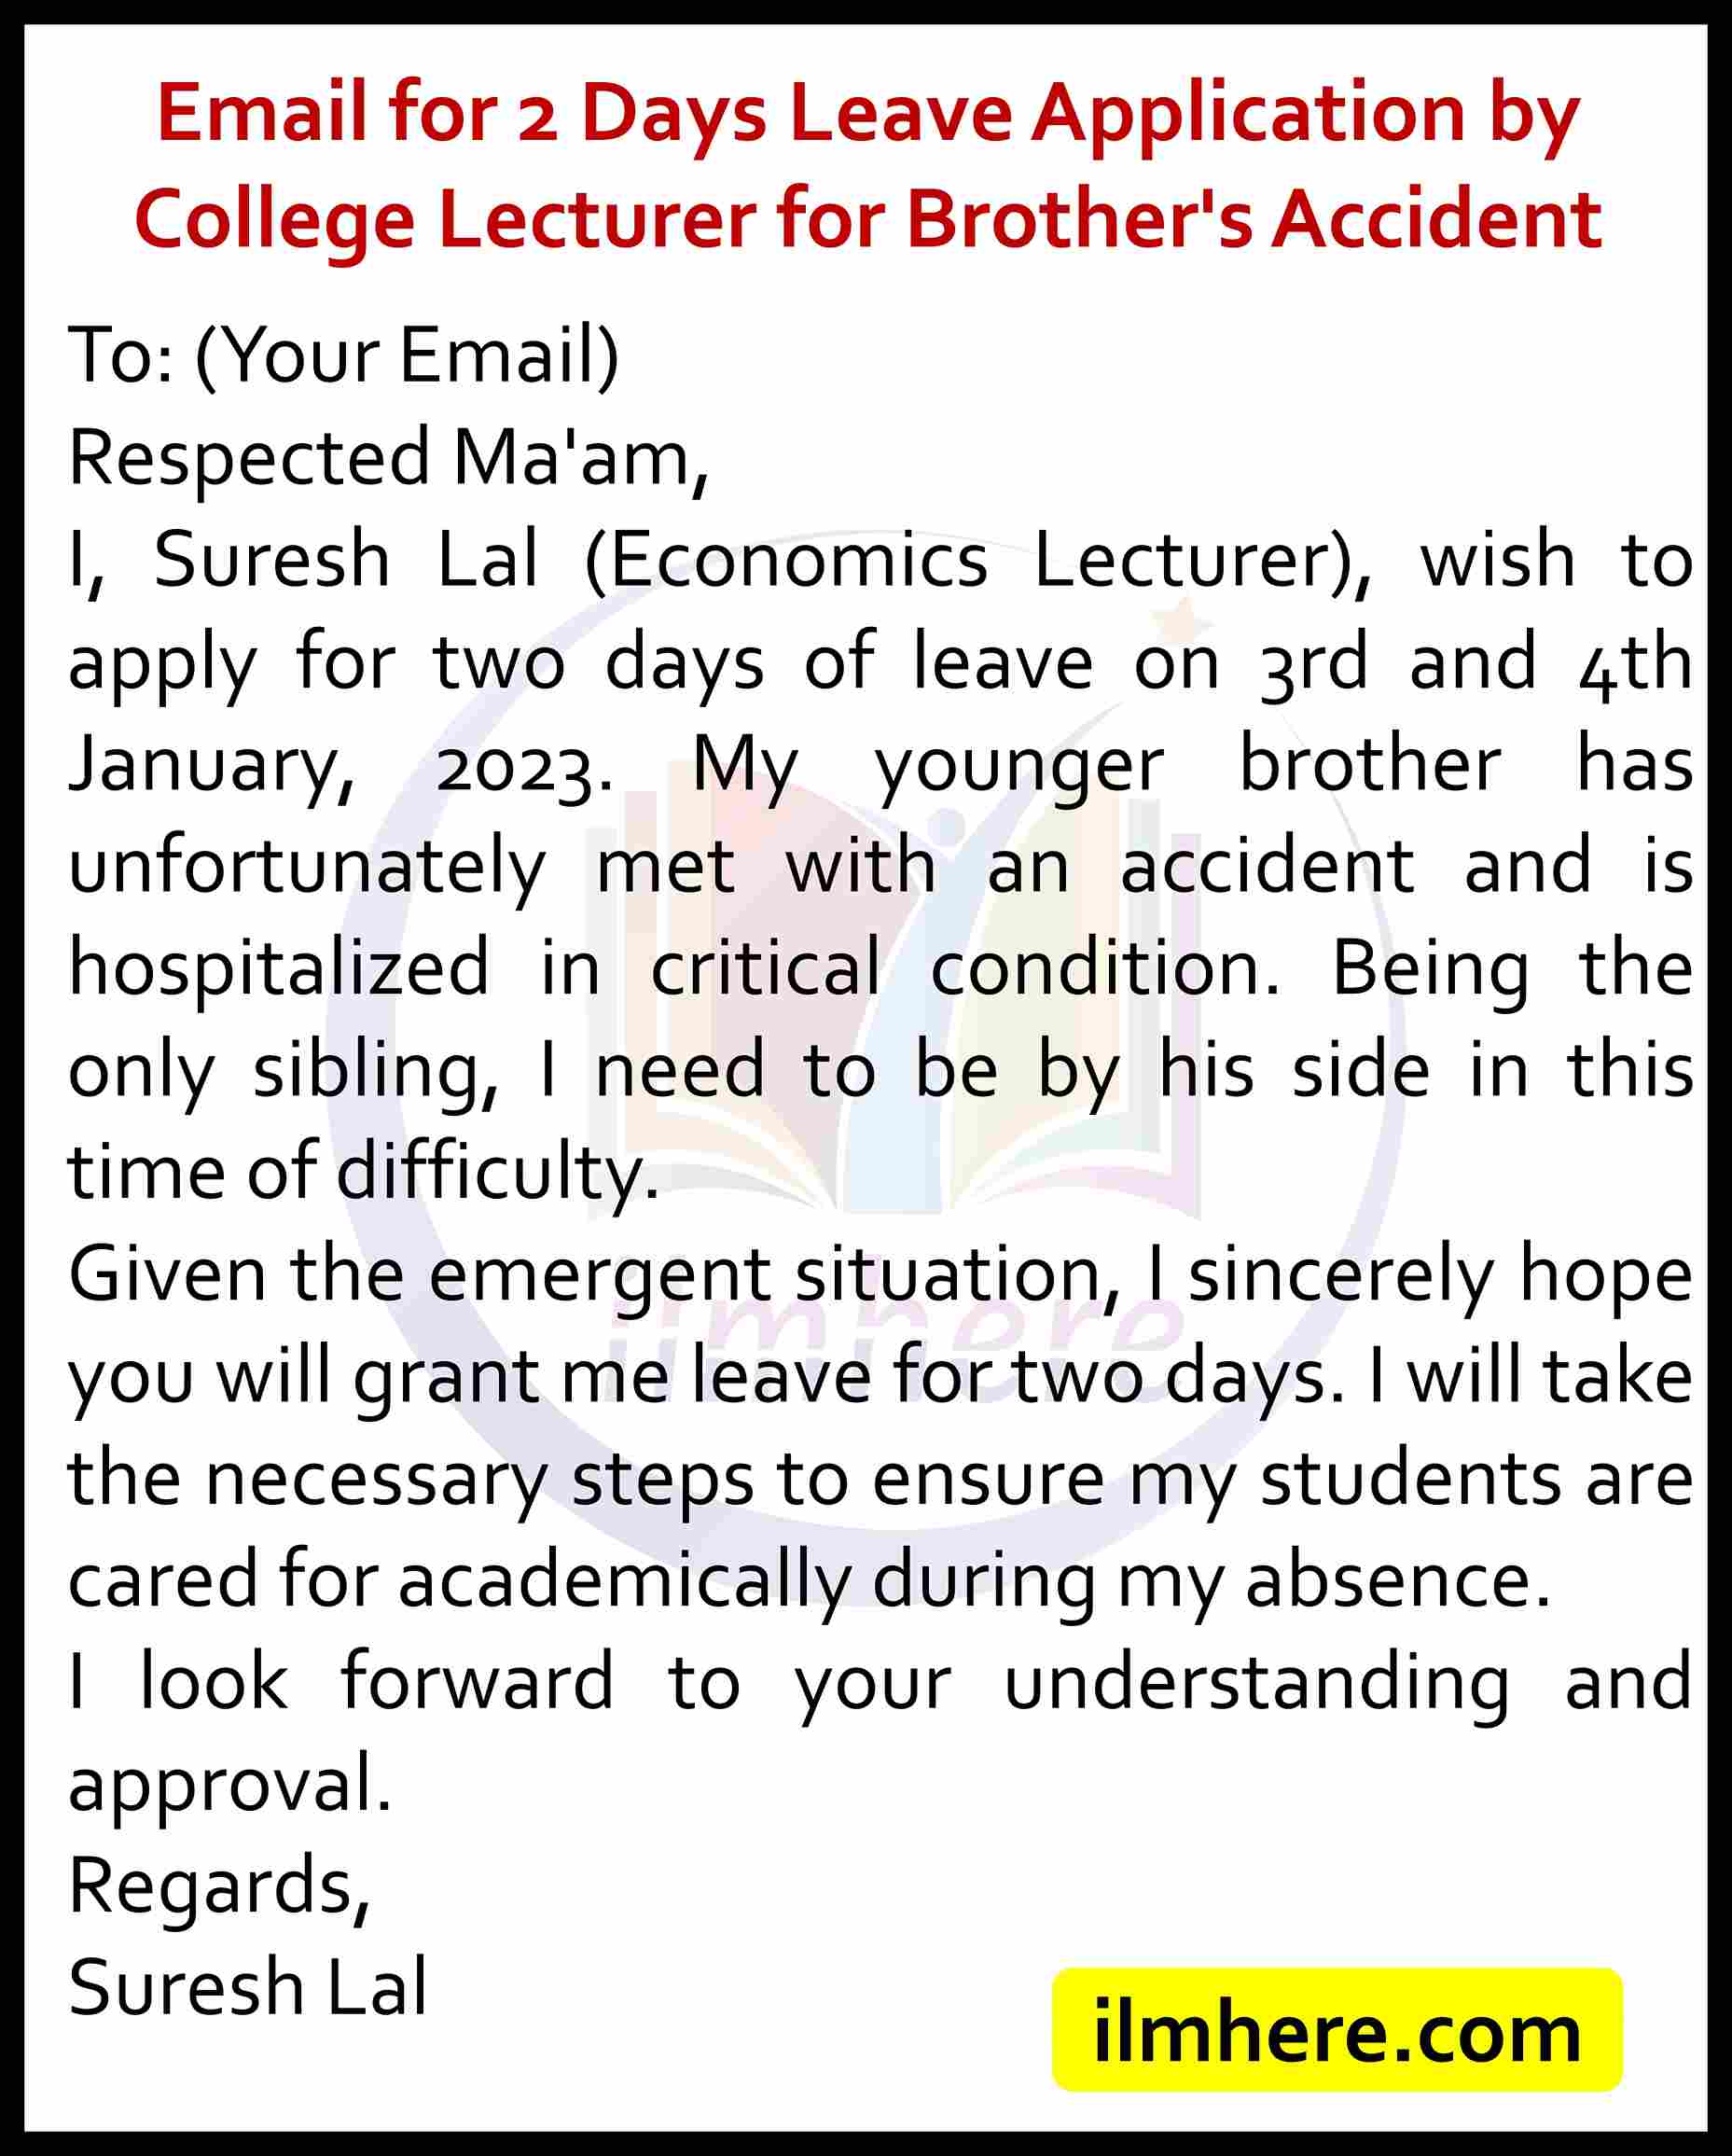 Email for 2 Days Leave Application by College Lecturer for Brother's Accident